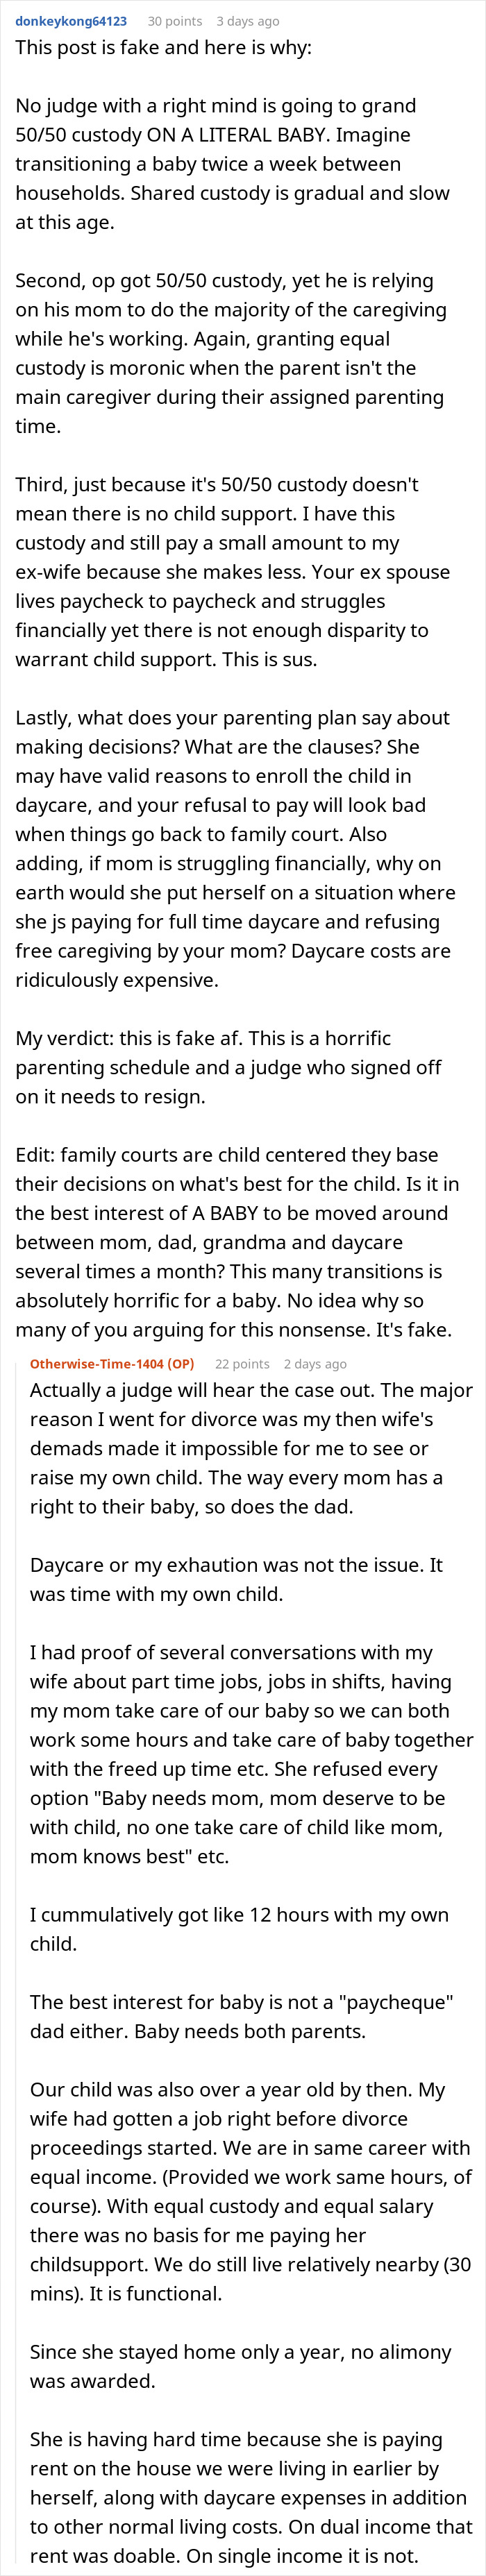 New Mom Regrets Refusing To Go Back To Work After Her Husband Divorces Her